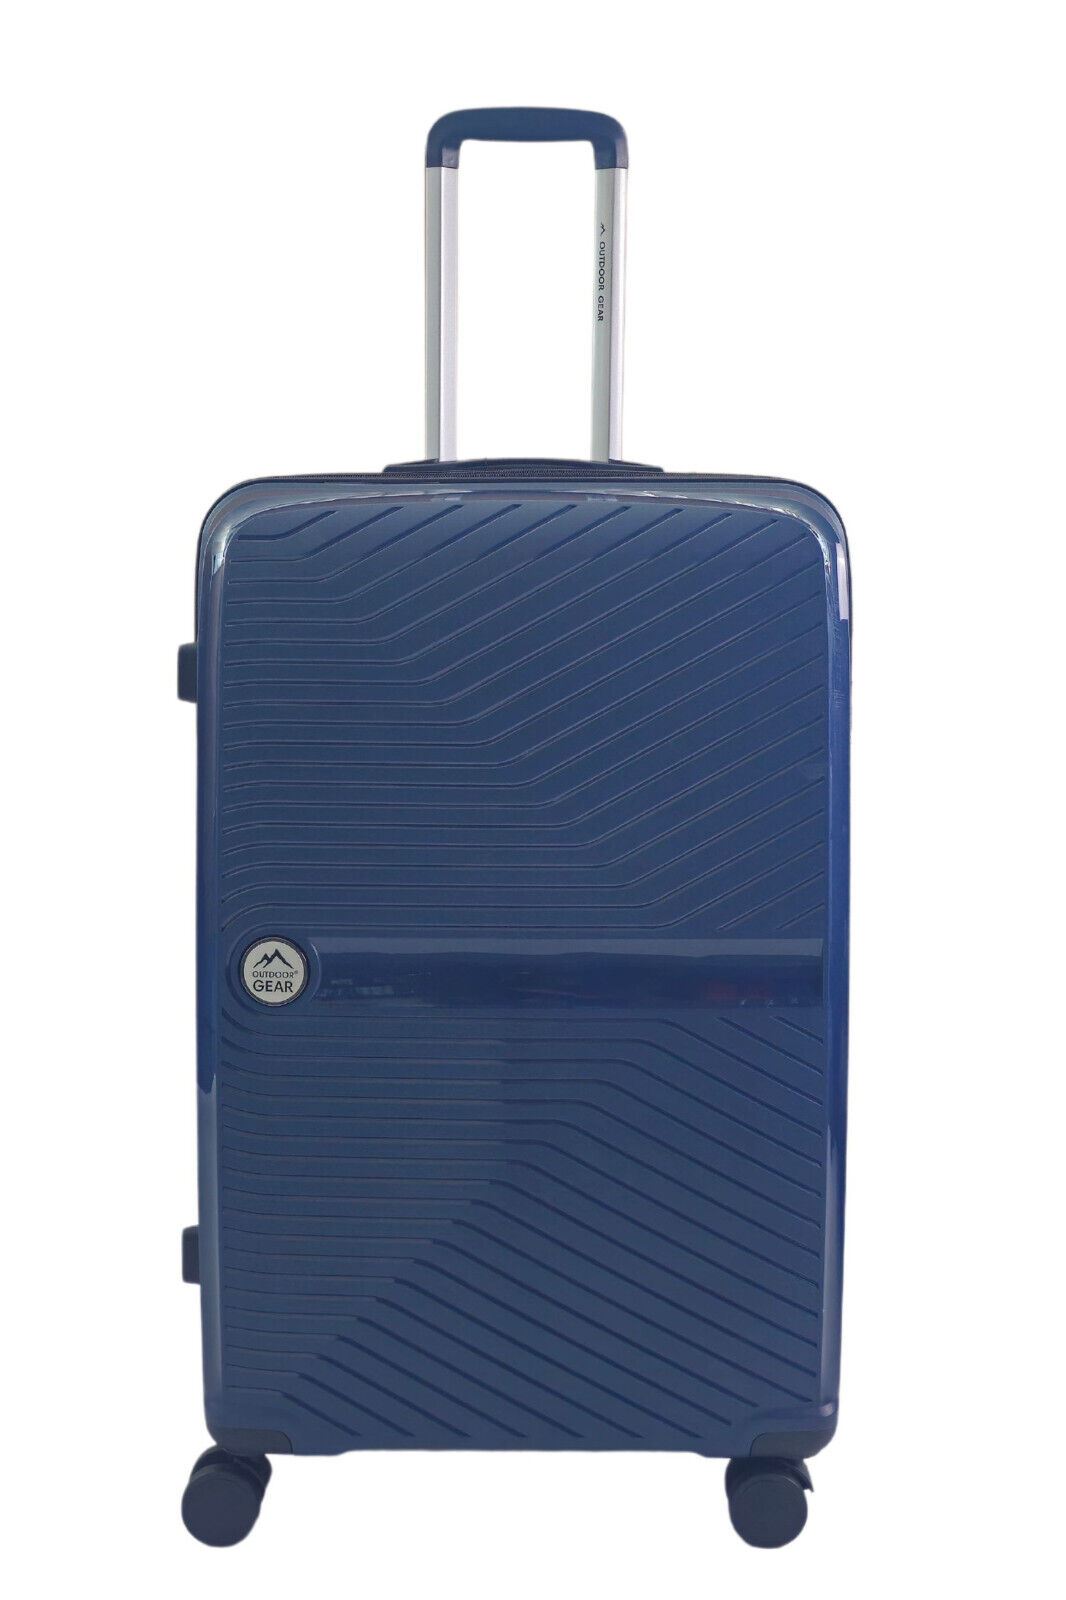 Abbeville Large Hard Shell Suitcase in Navy